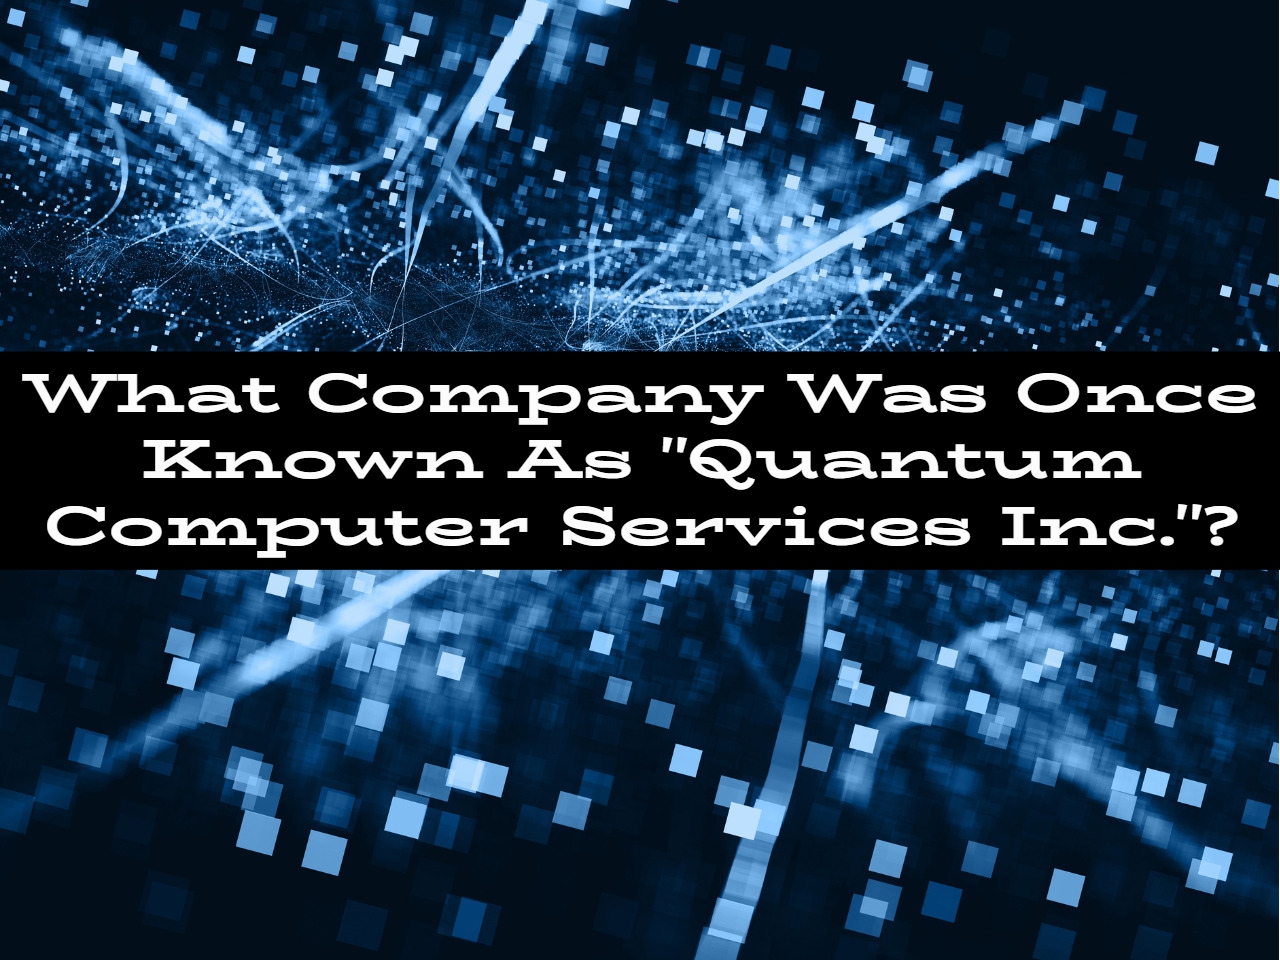 What Company Was Once Known As "Quantum Computer Services Inc."?